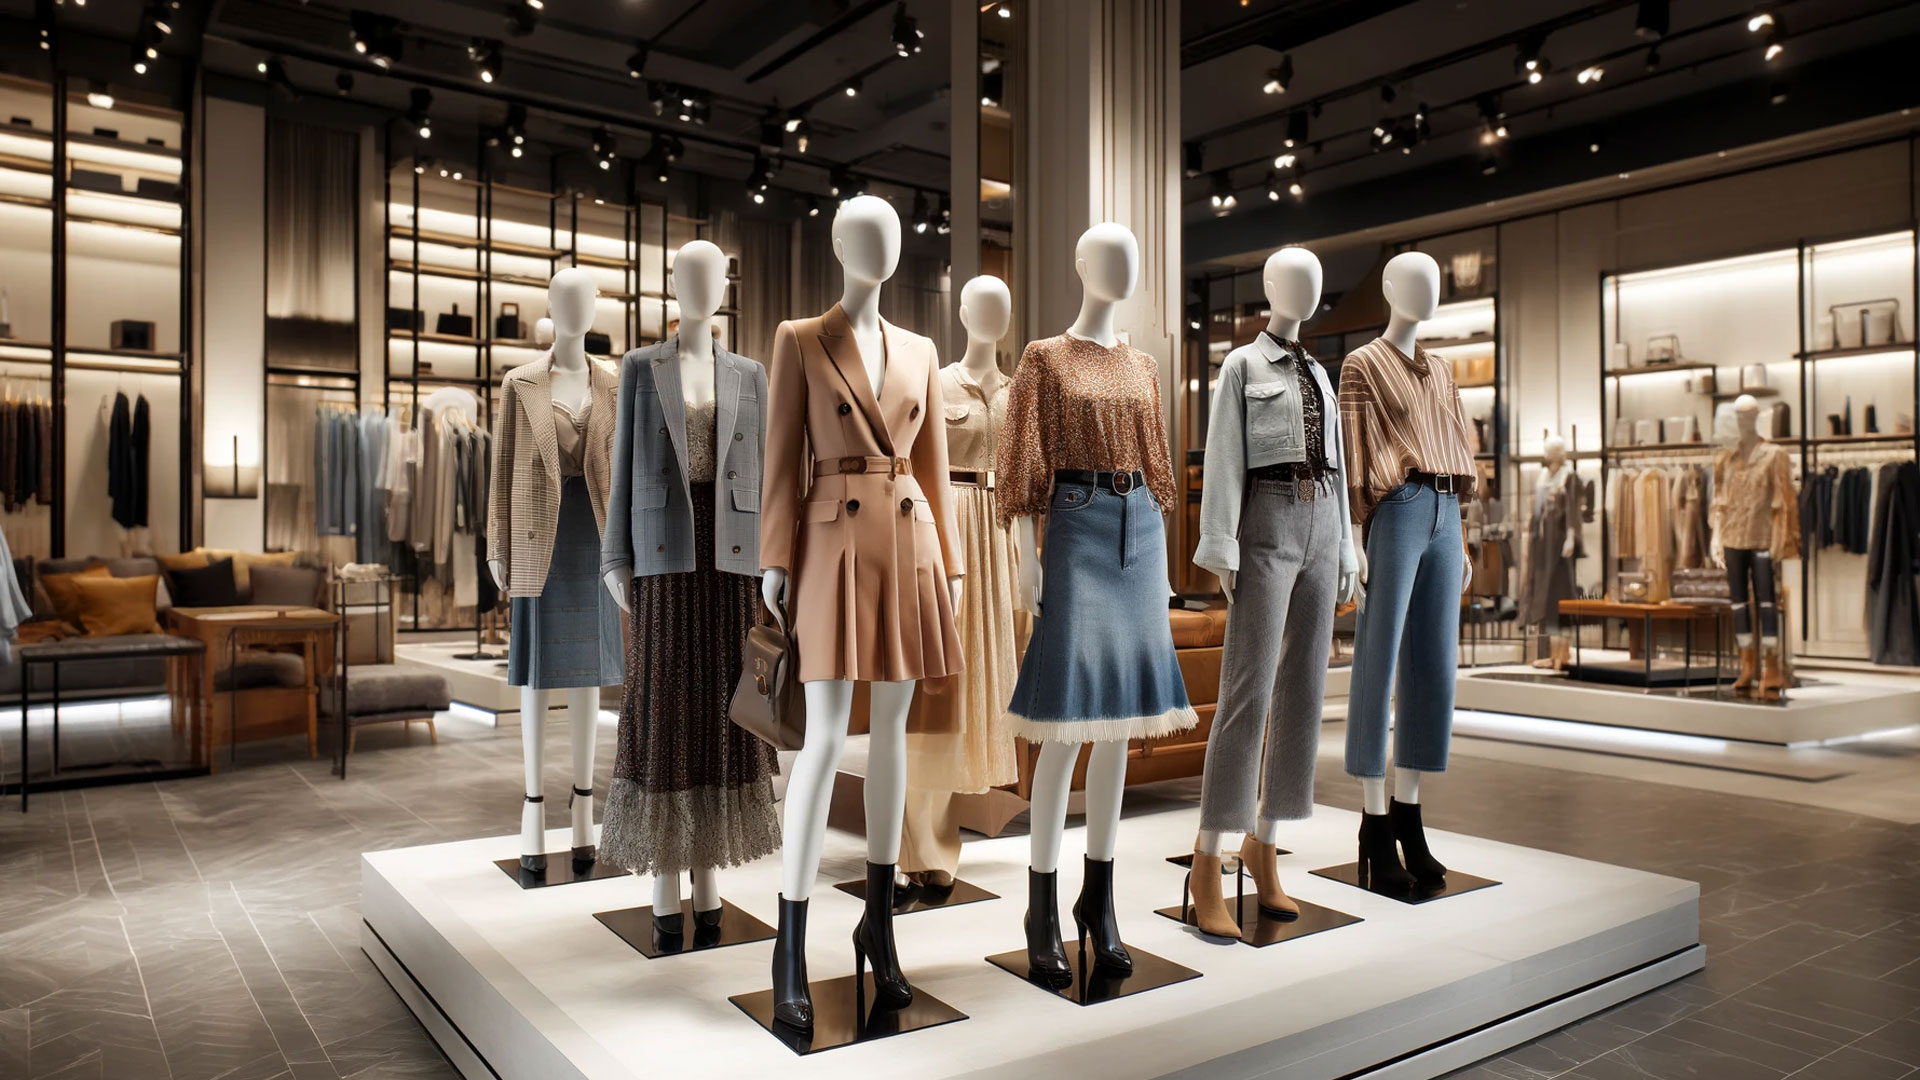 ZARA Reopens Flagship Store in Costa Rica with Innovative Concept